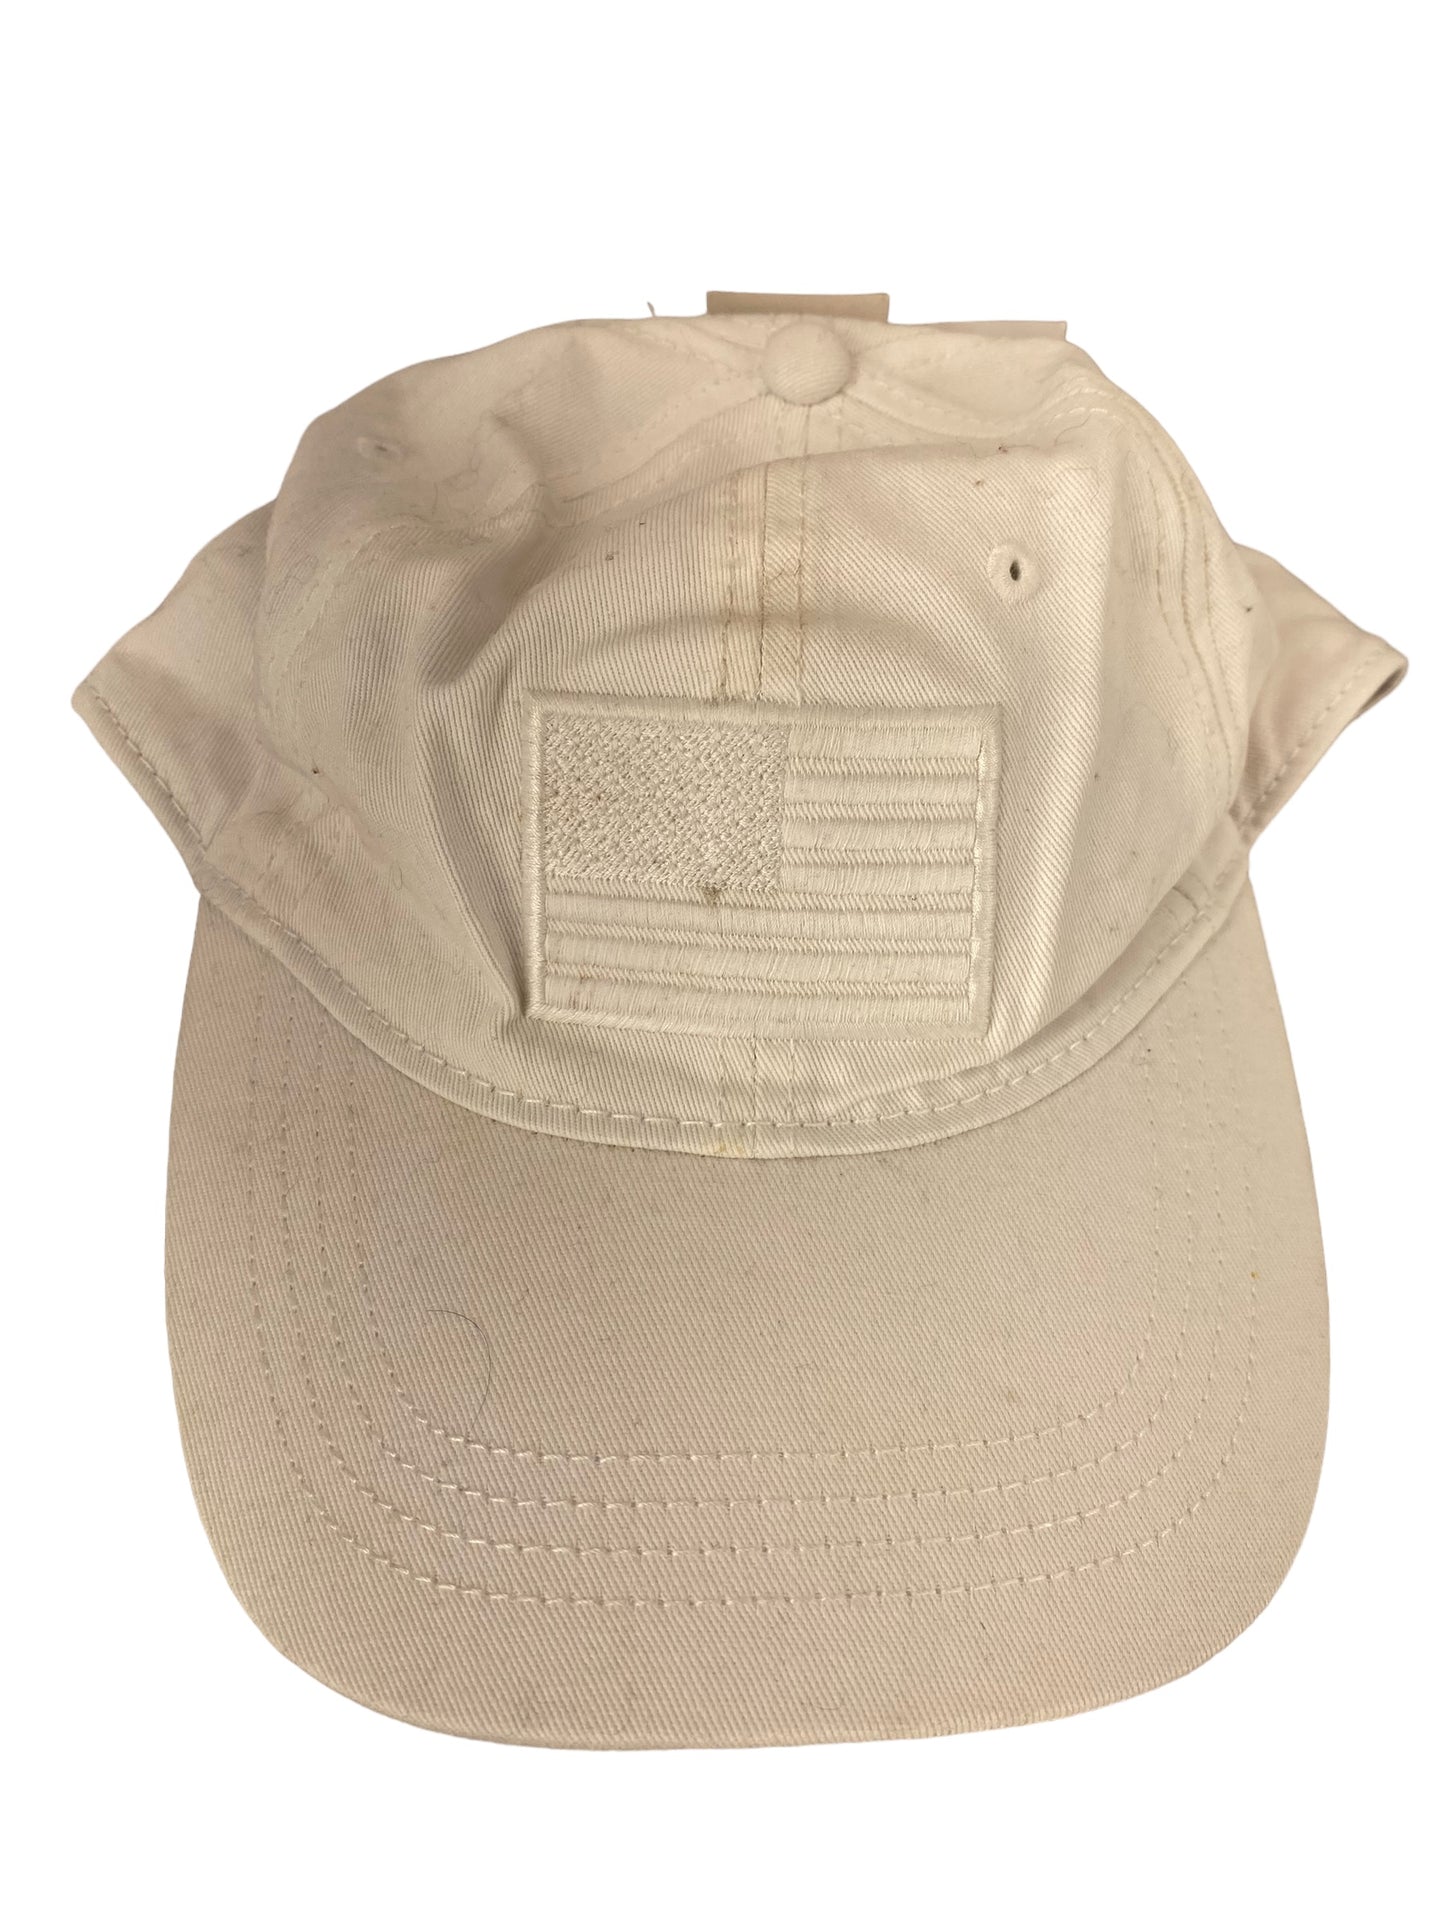 Hat Baseball Cap By Clothes Mentor